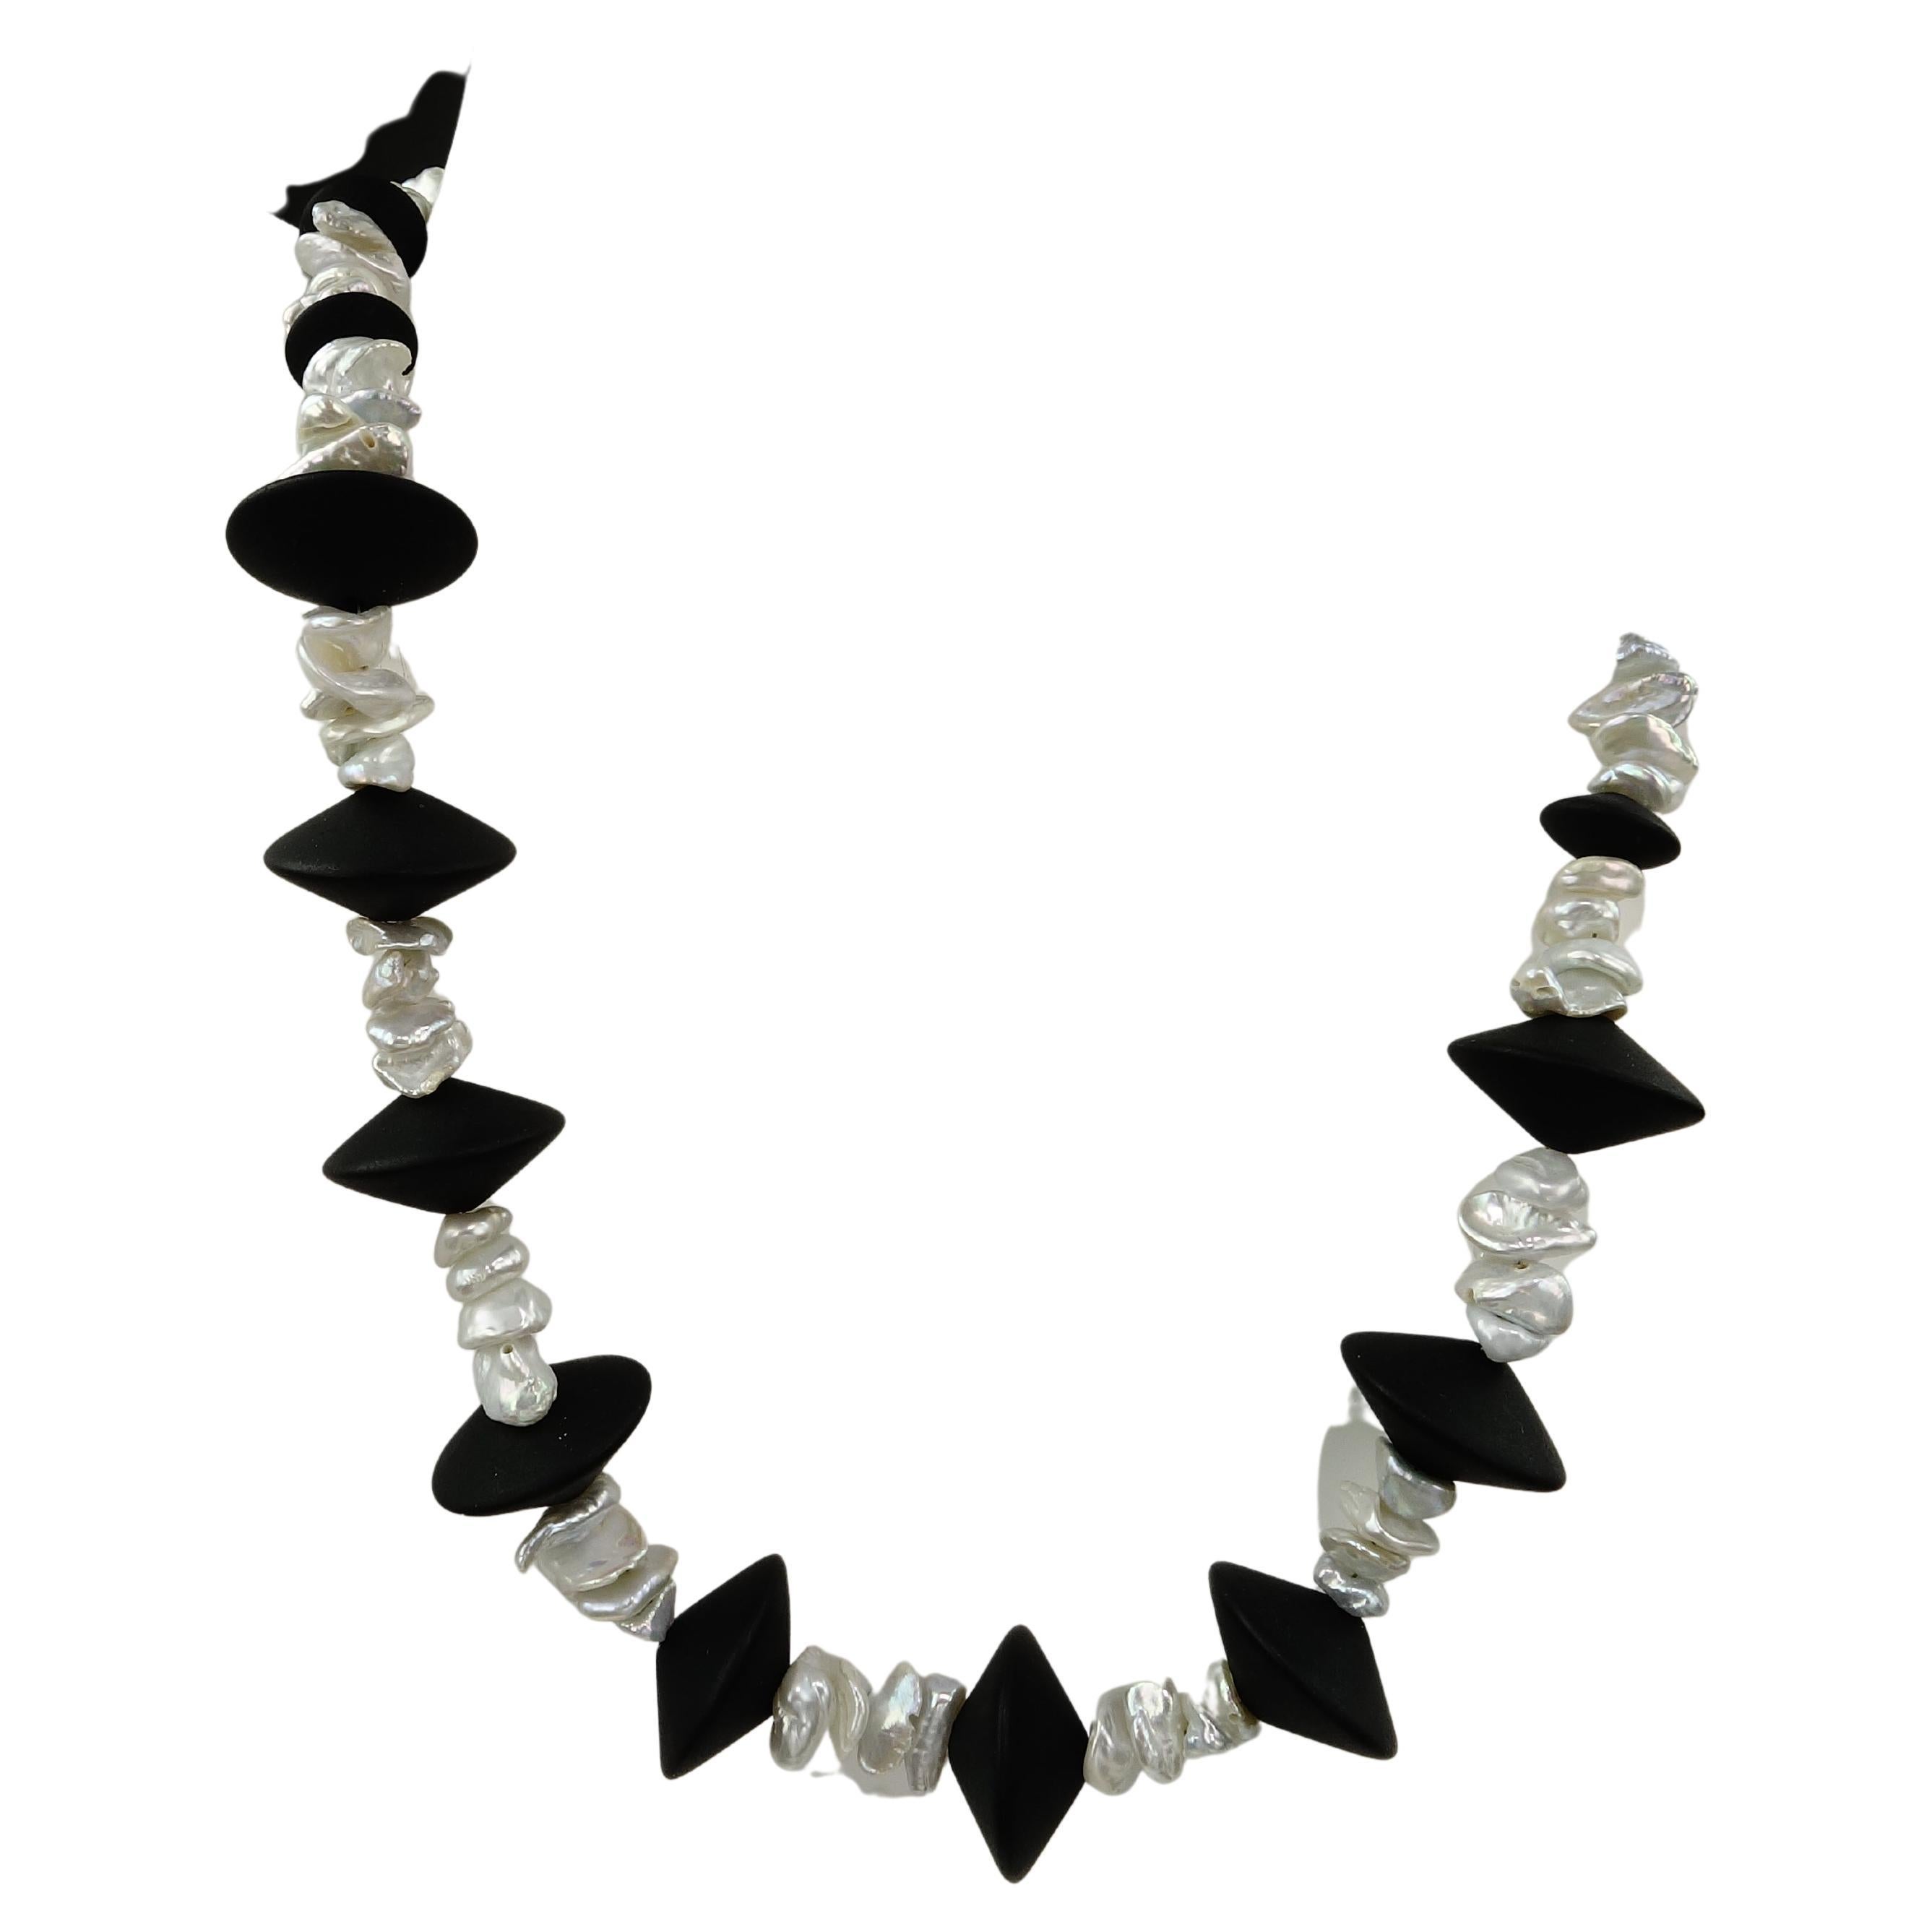 16 Inch Choker necklace of Matte Rondelle Black Onyx and shimmering silvery Biwa pearls.  This contrast between the Pearls and Black Onyx makes a striking choker necklace.  At 16 inches this unique piece sits at the base of the neck. It is secured